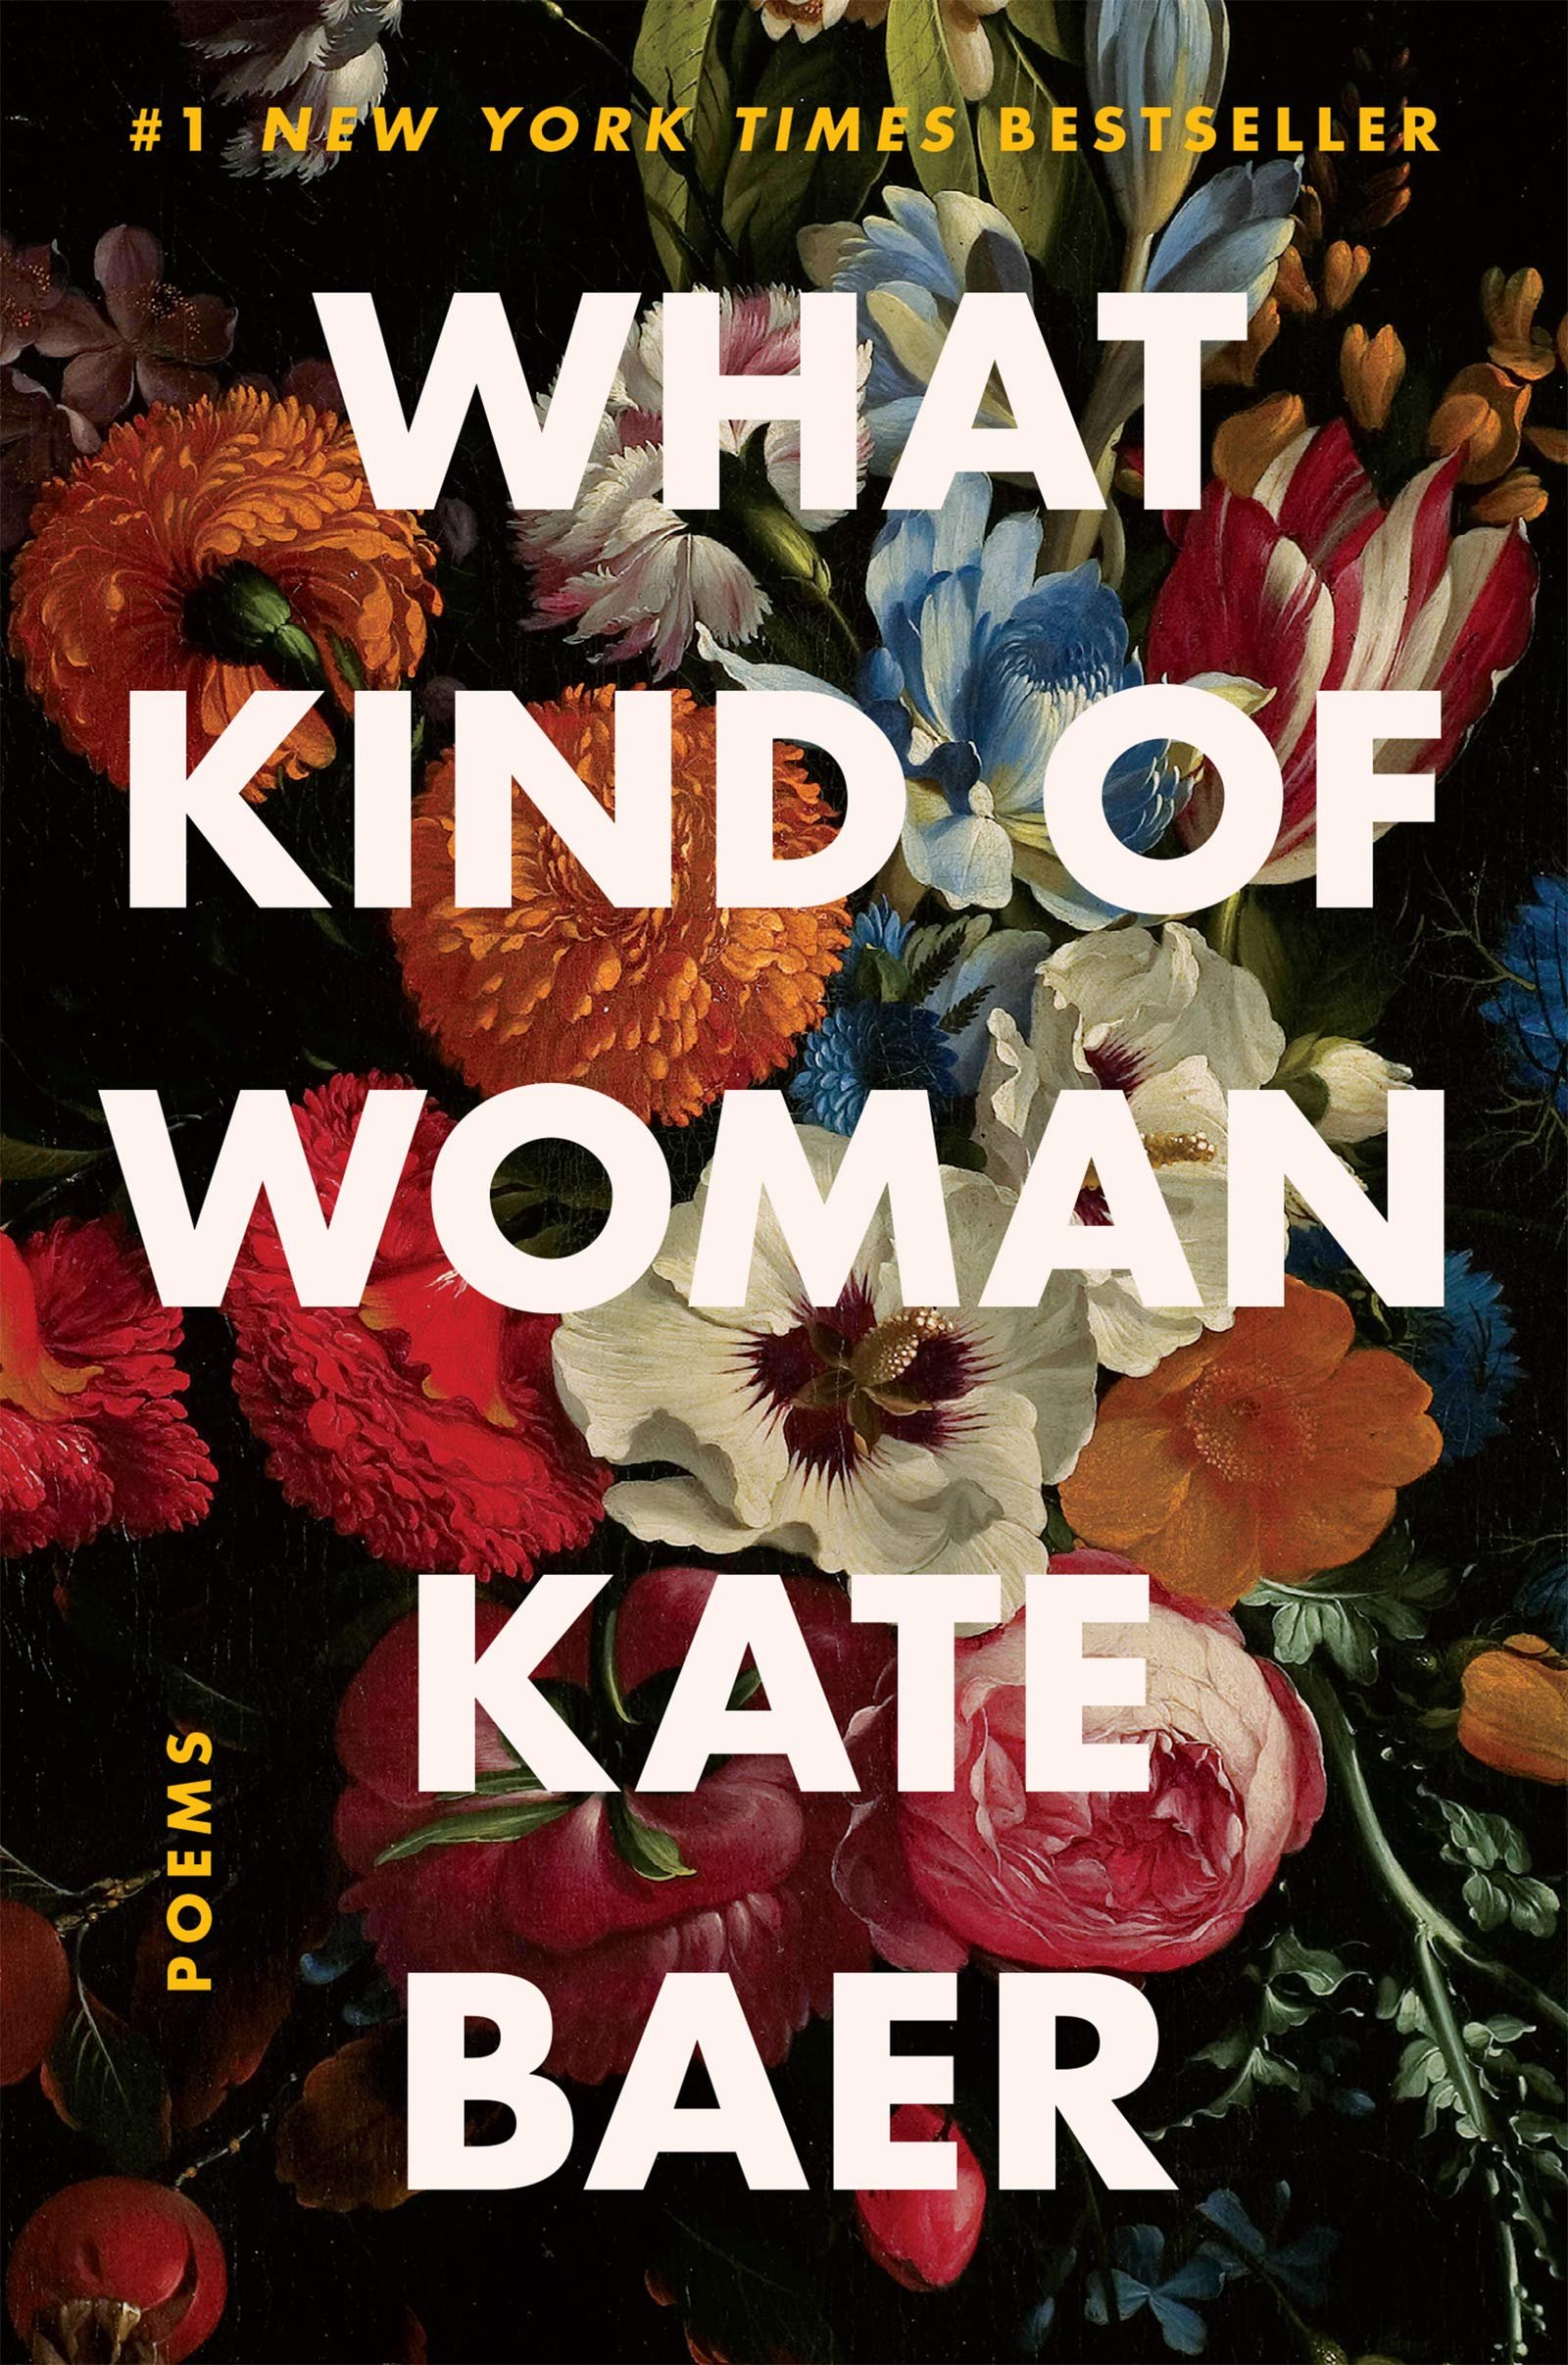 Kind of Woman — Midtown Scholar Bookstore-Cafe